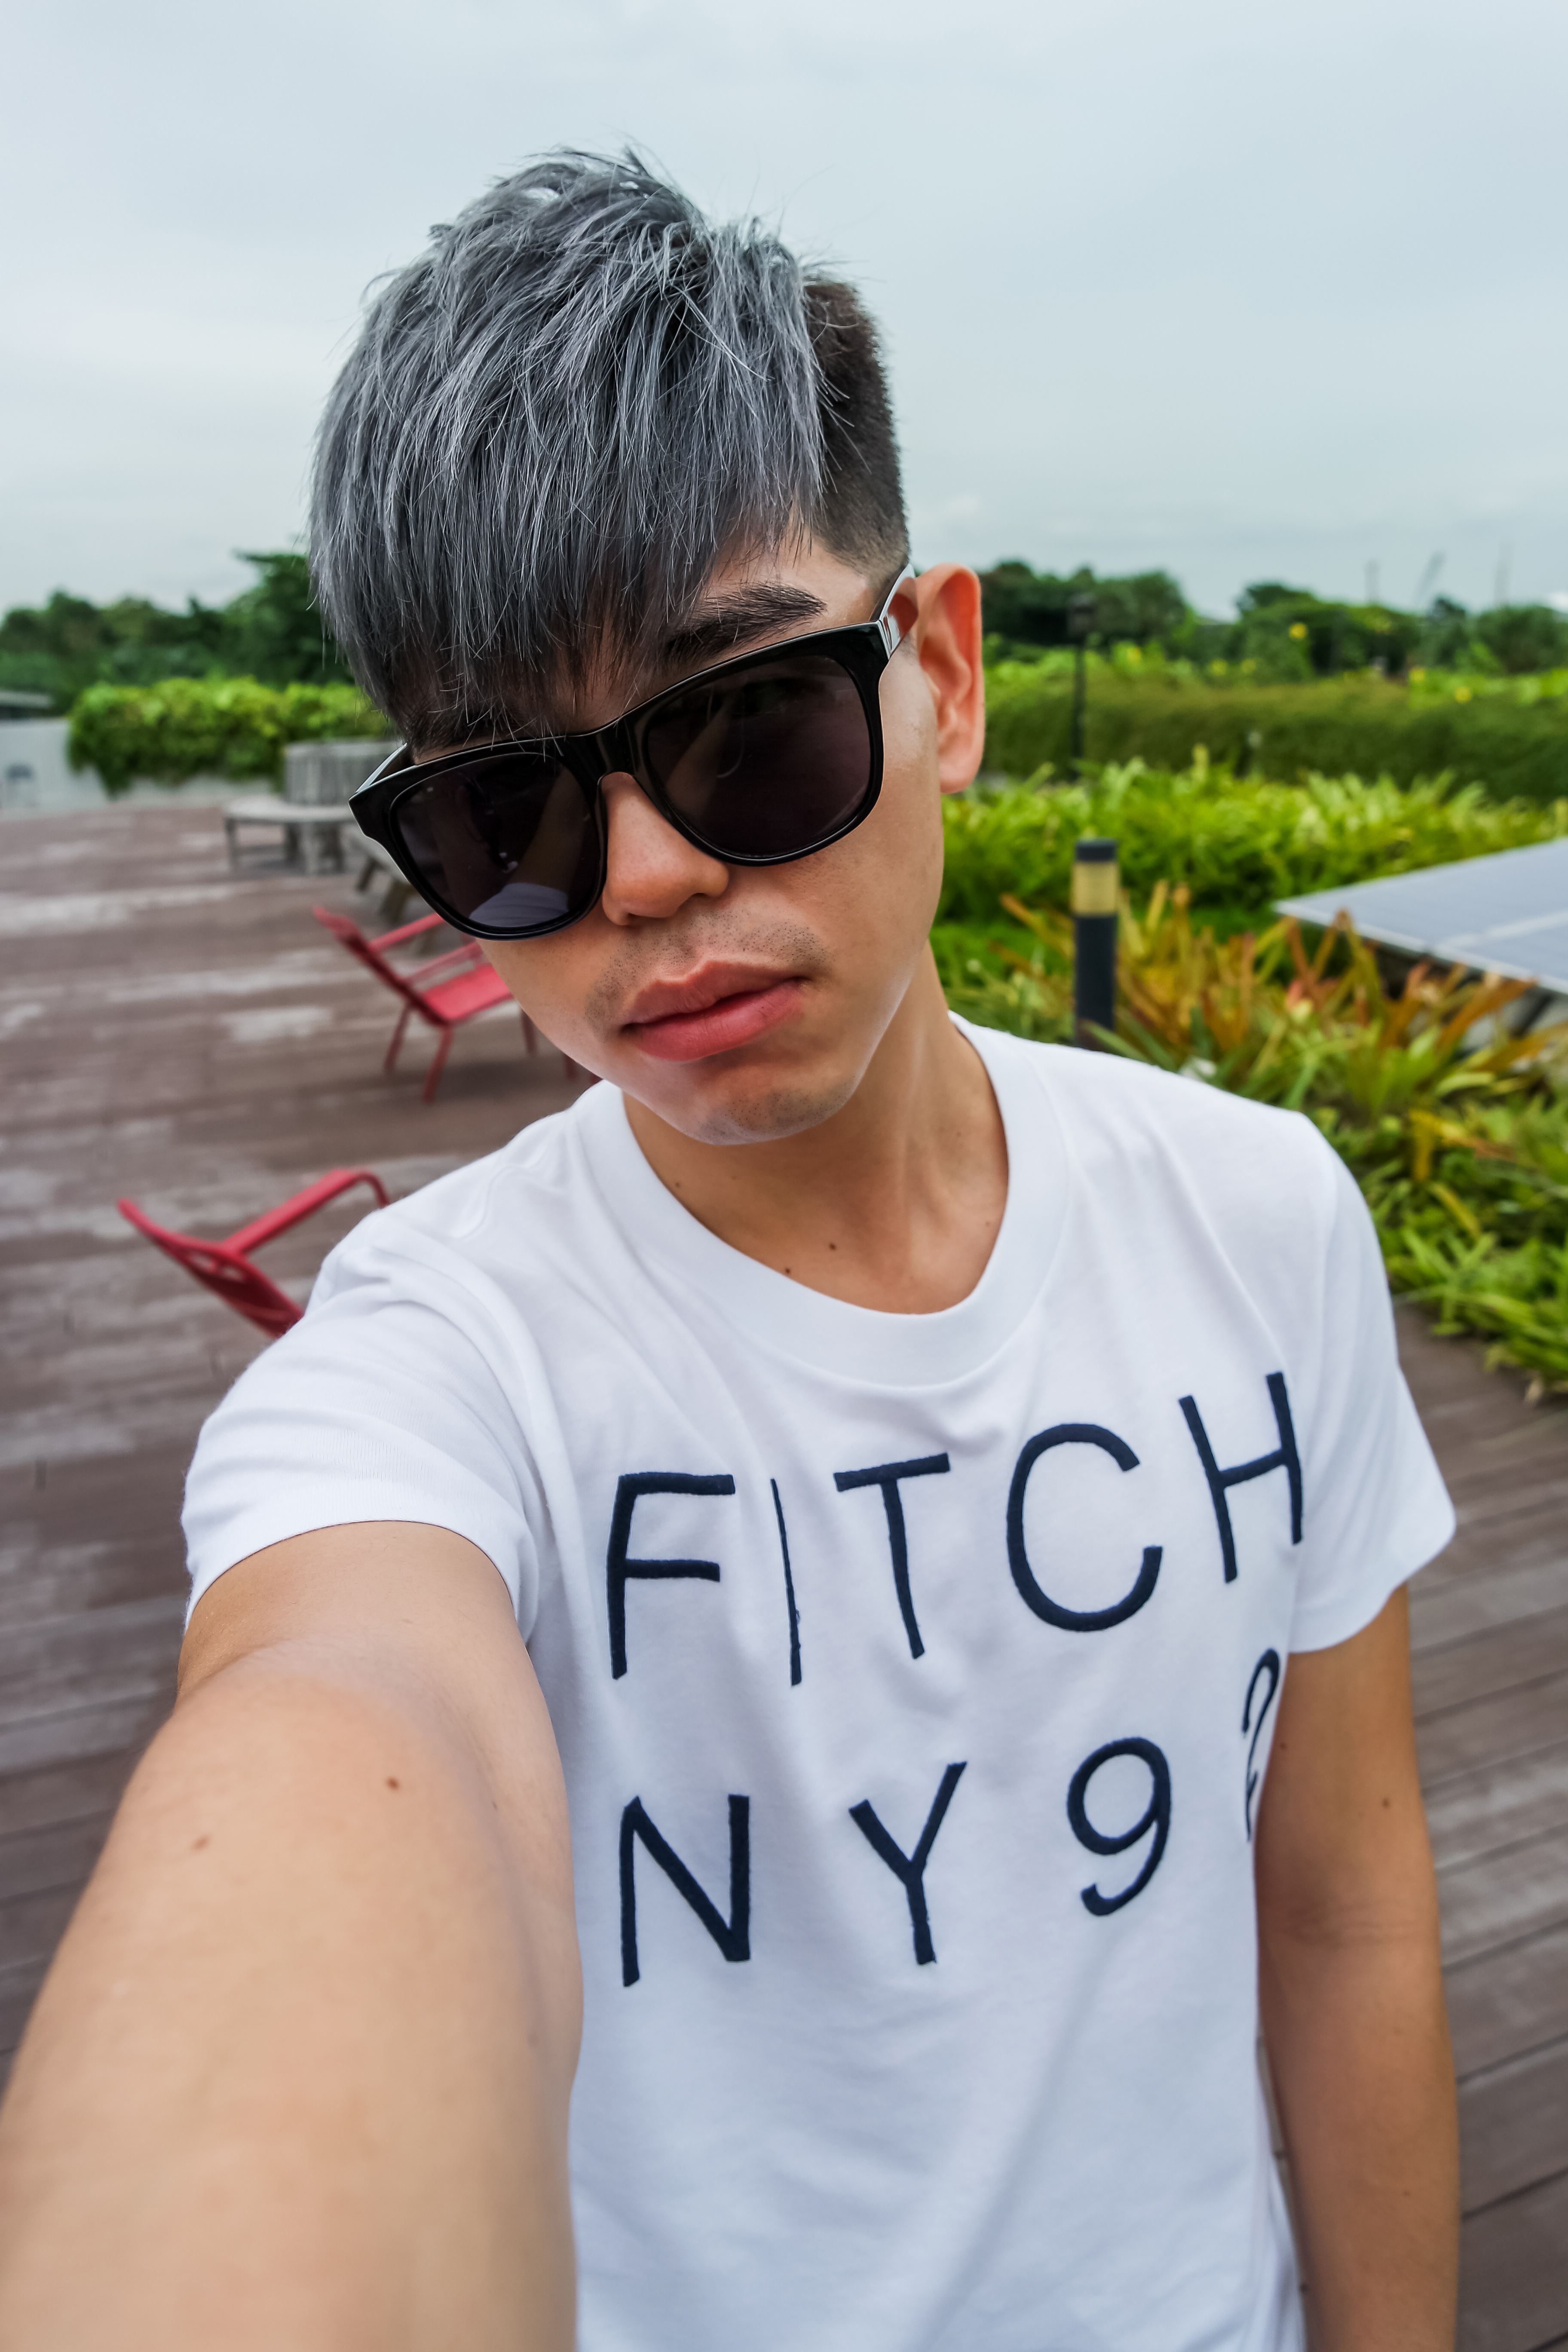 Cool Ash Grey Hair Color From 99 Percent Hair Studio